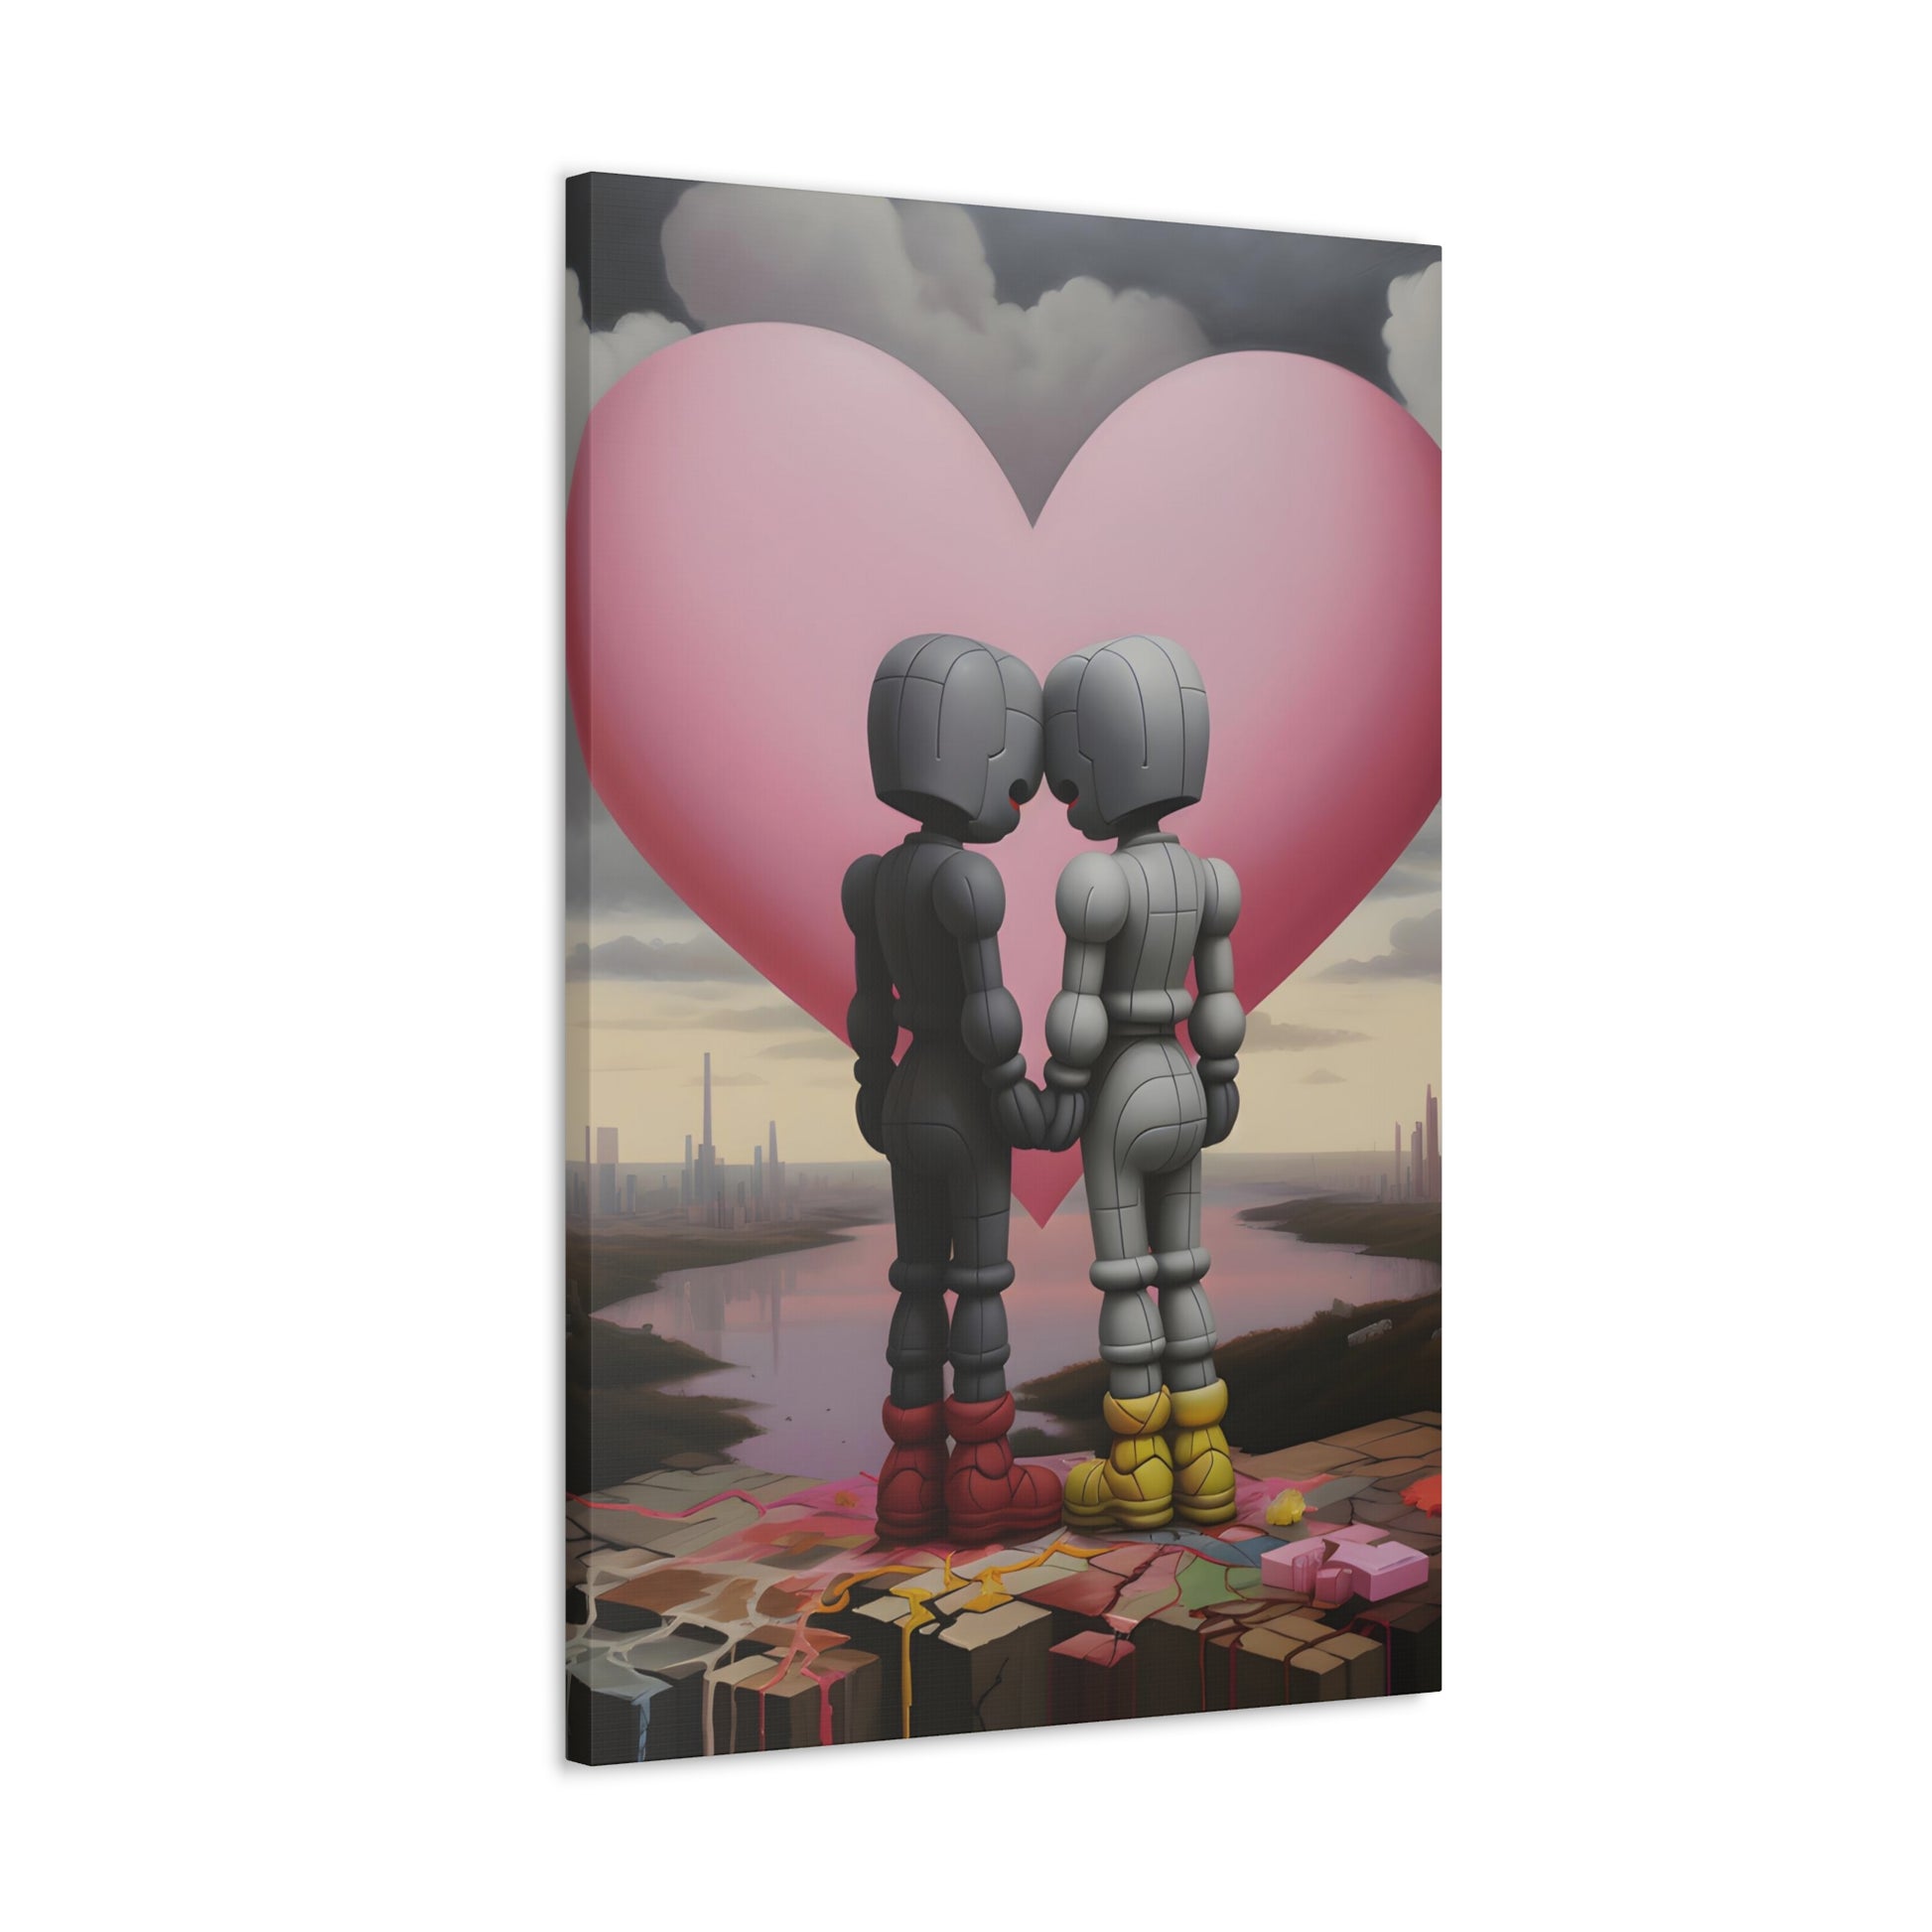 angled 3 Contemporary artwork by Archer Dent, reflecting on connection in a mechanized era, blending urban surrealism with a tender embrace against a stark cityscape, provoking thoughts on love amidst modernity.